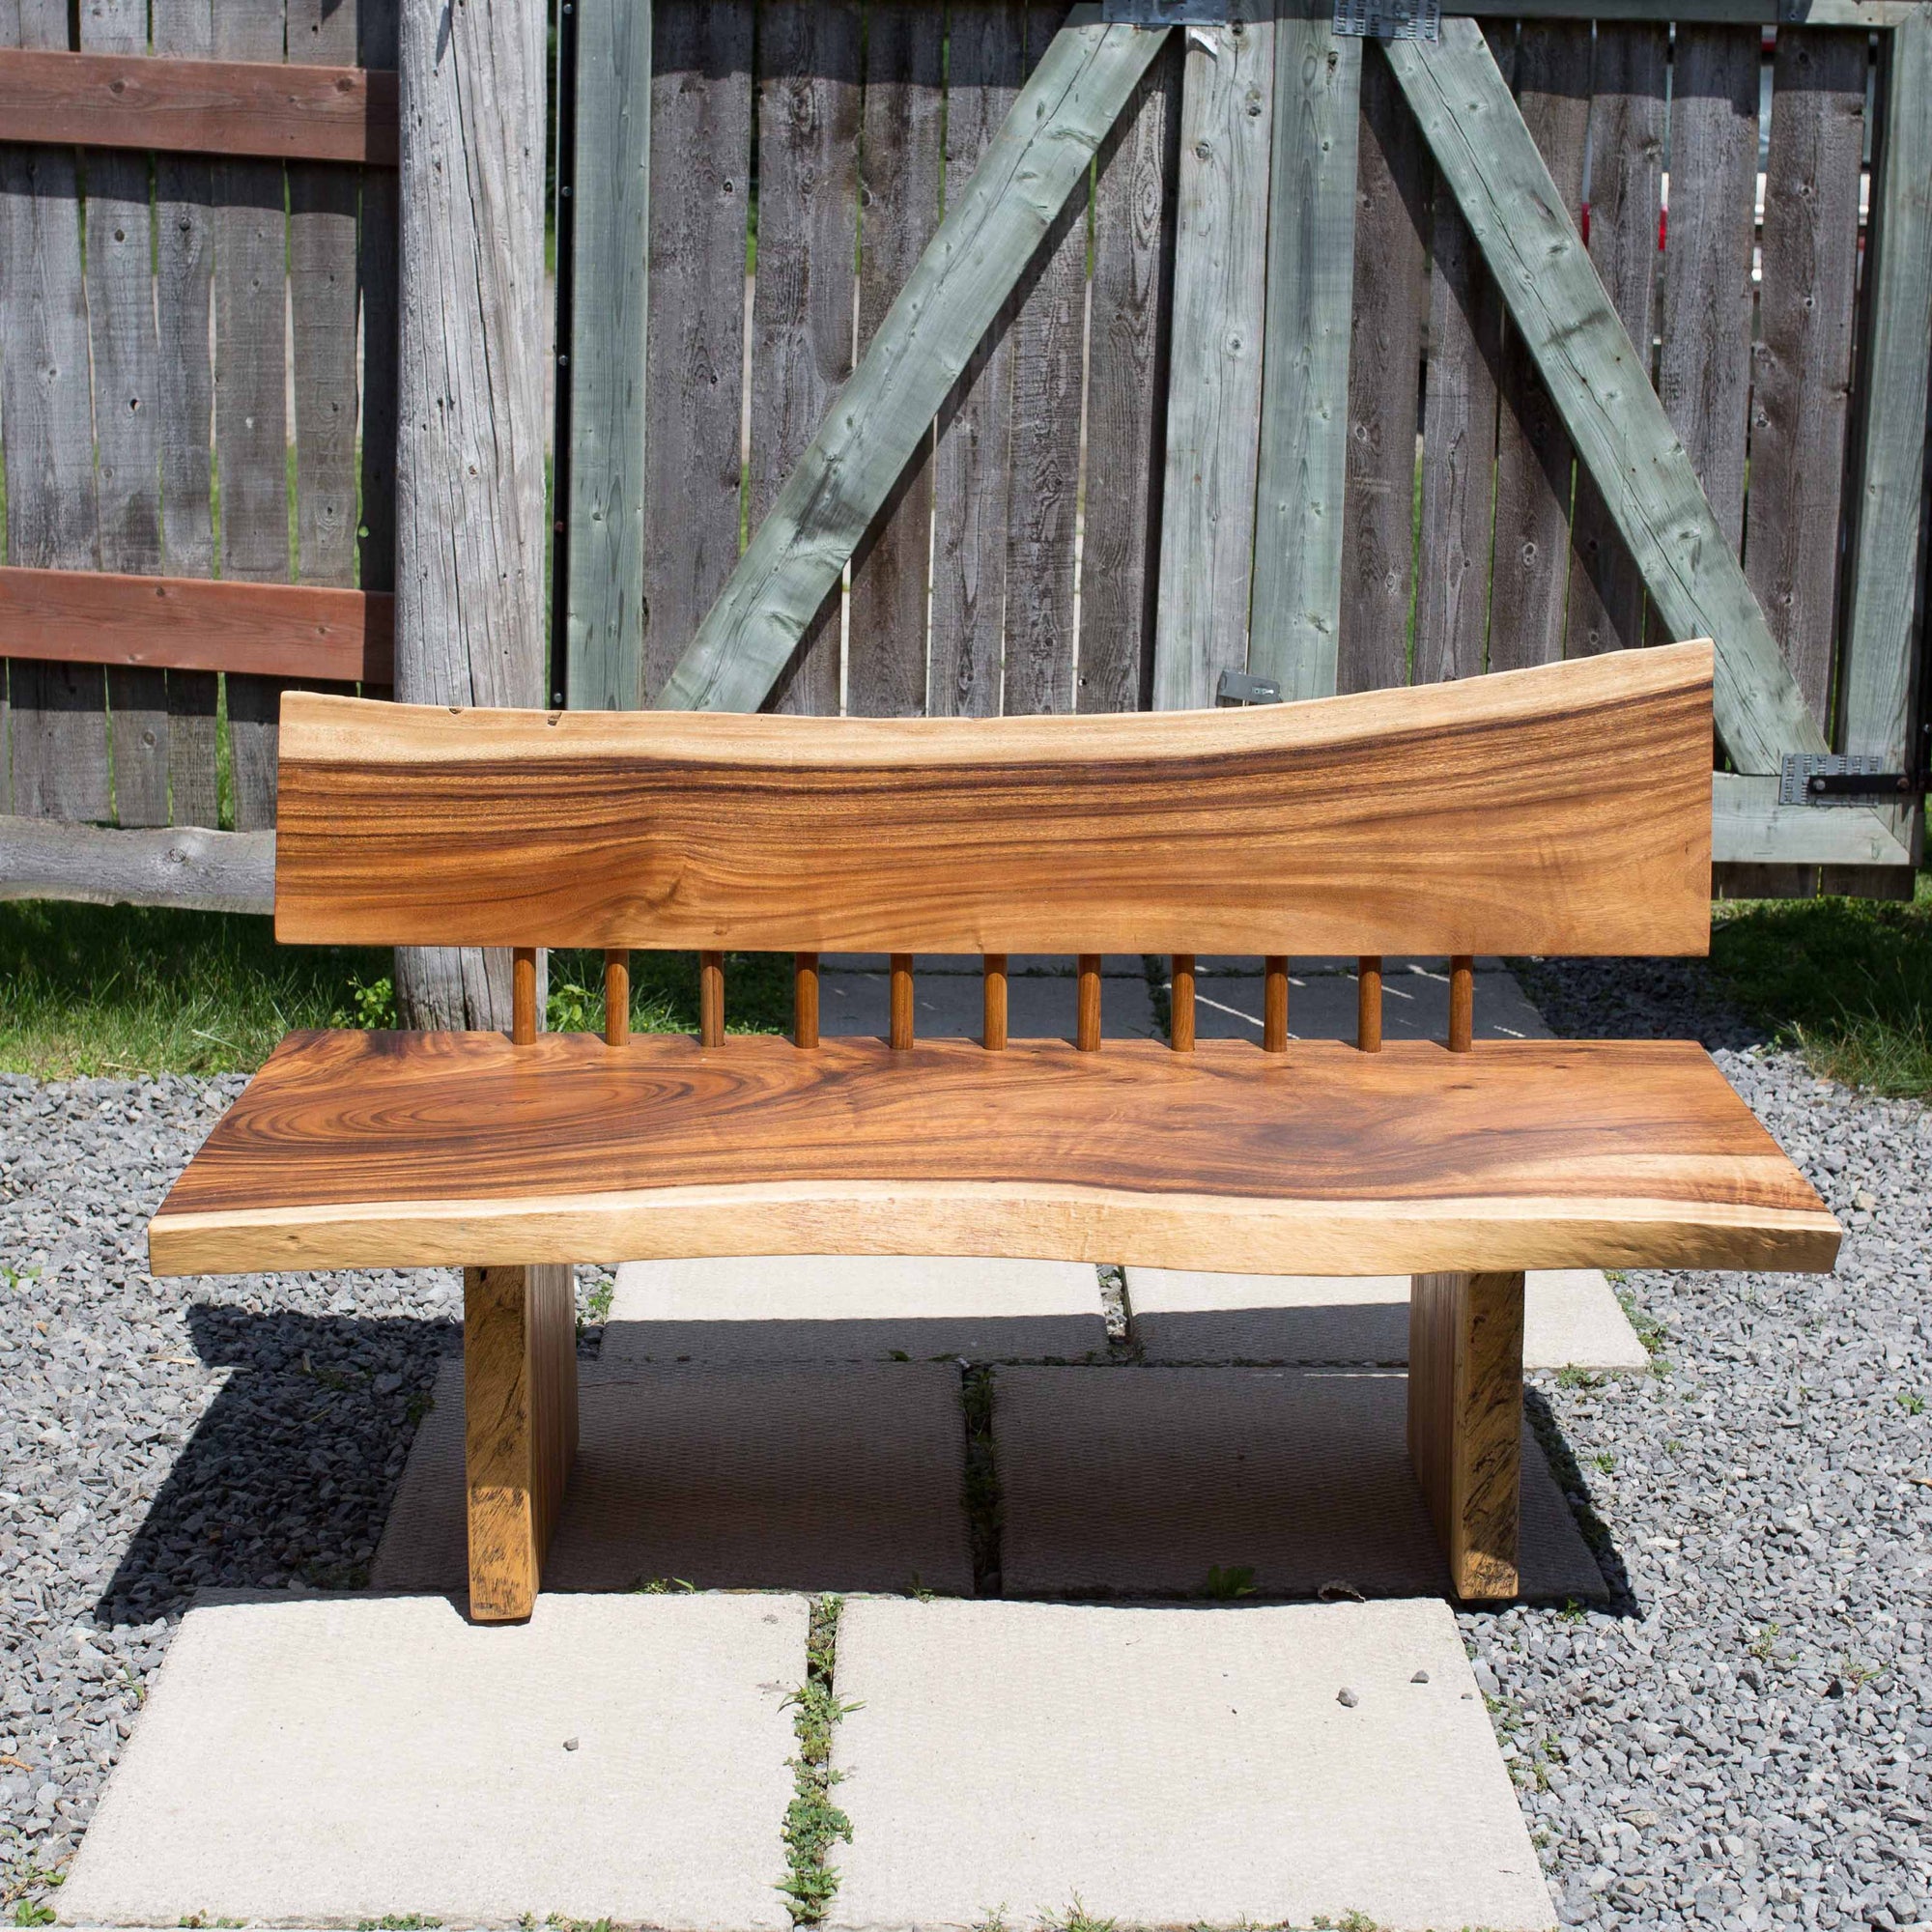 Photo of a sono wood large bench outdoors on a patio against a fence background